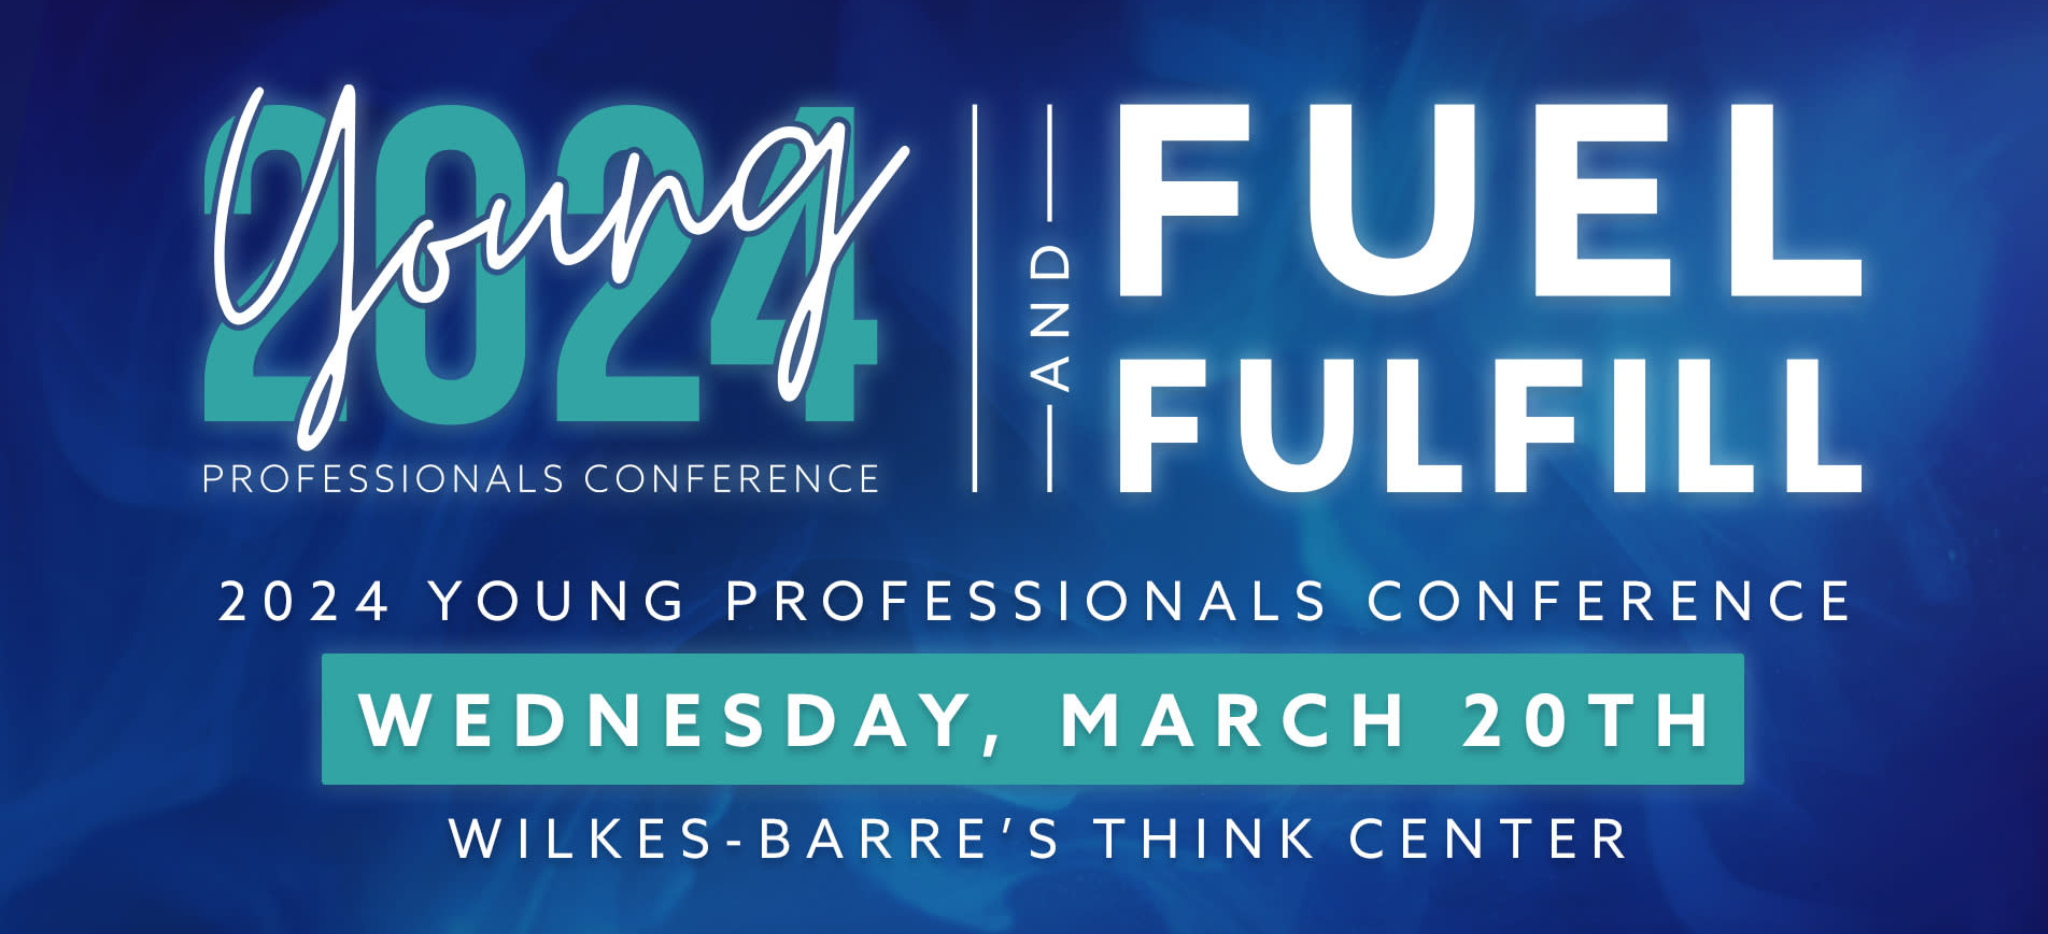 2024 Young Professionals Conference